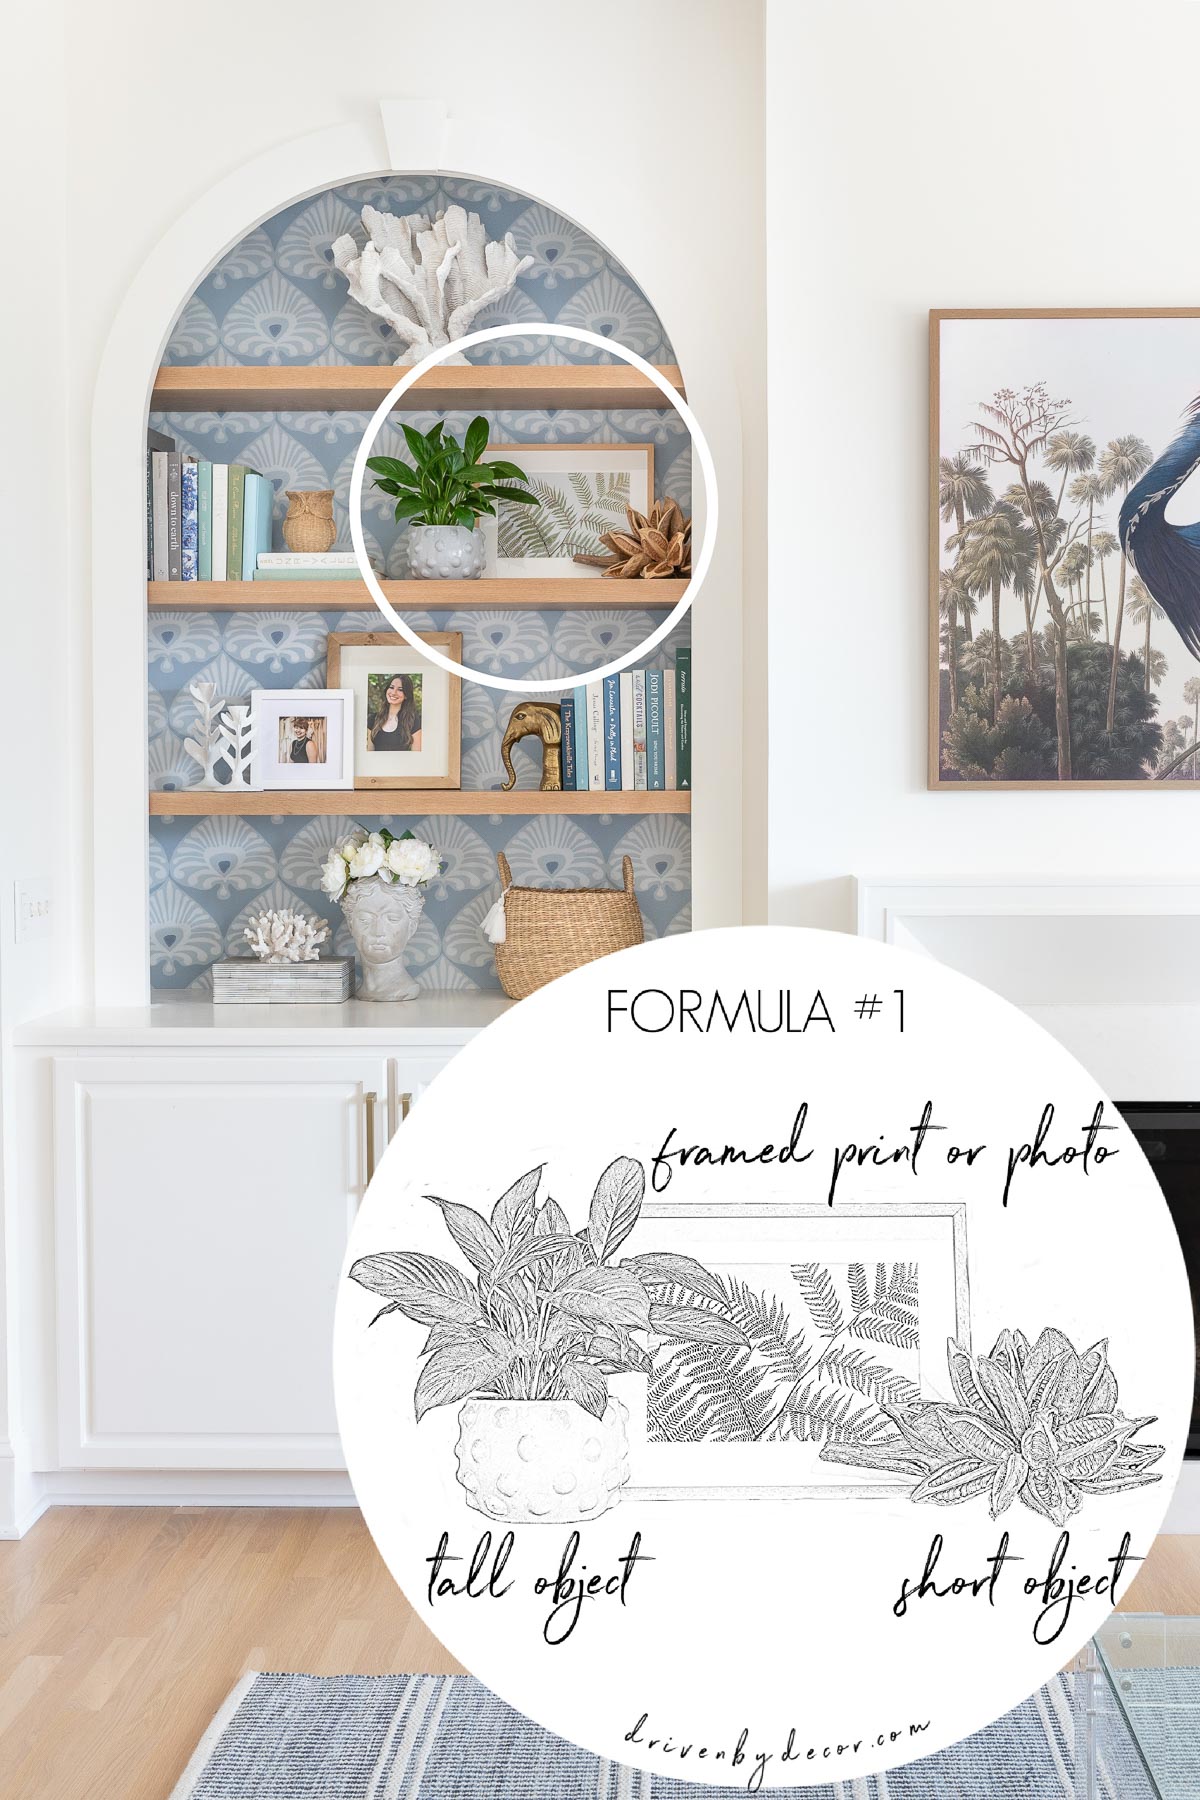 A plant, framed print, and small decorative object grouped together to decorate a shelf